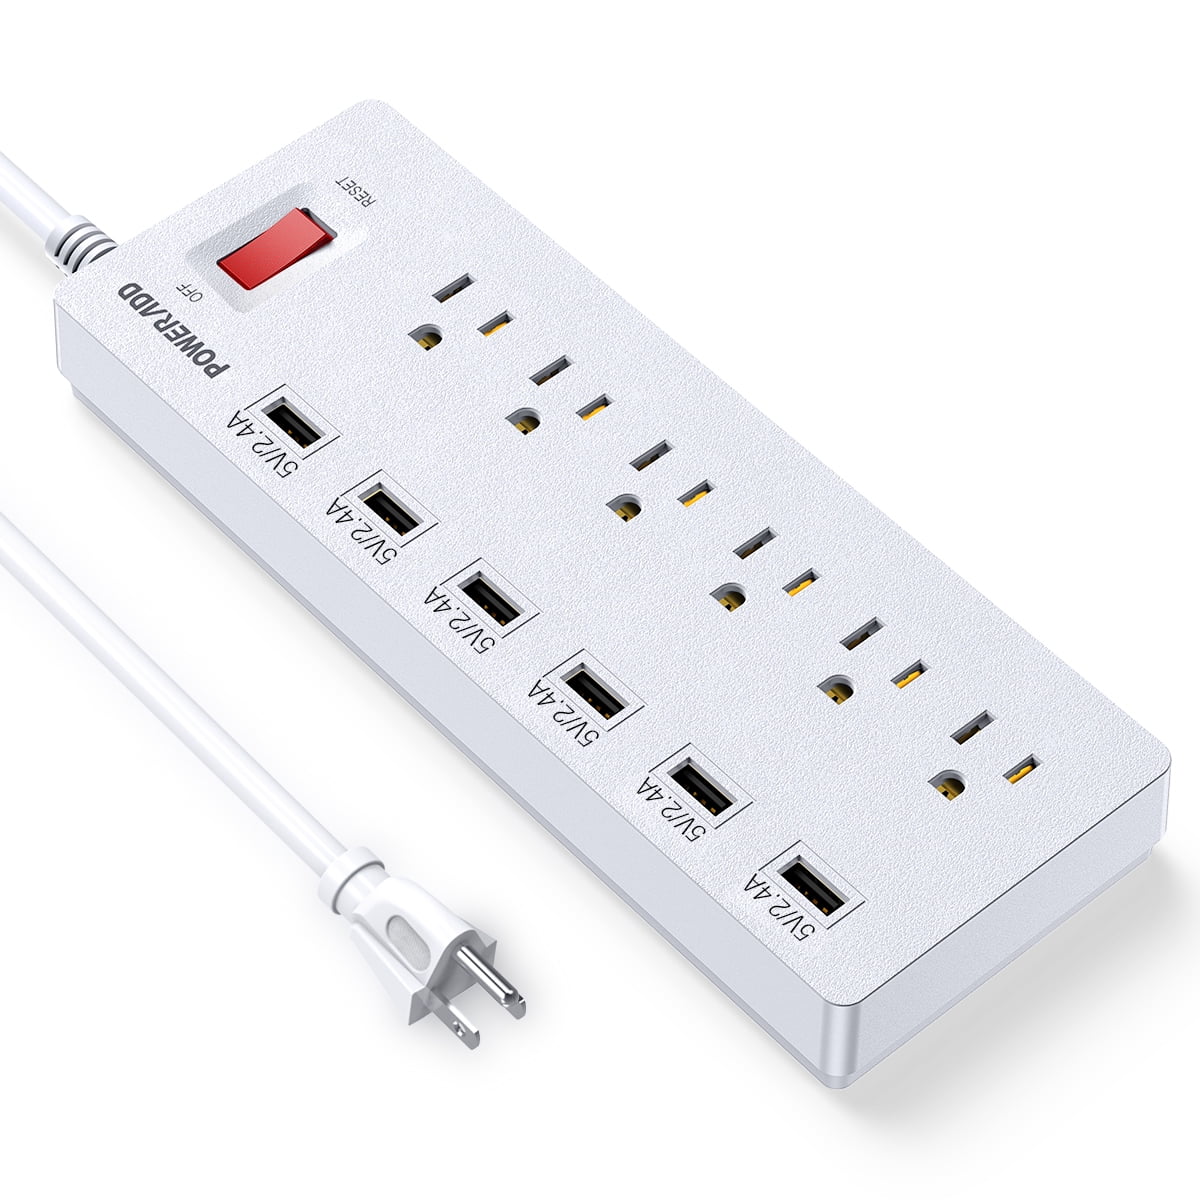 Poweradd 5FT 3 USB Ports 3 Outlets Power Strip Surge Protector AC Wall Socket 